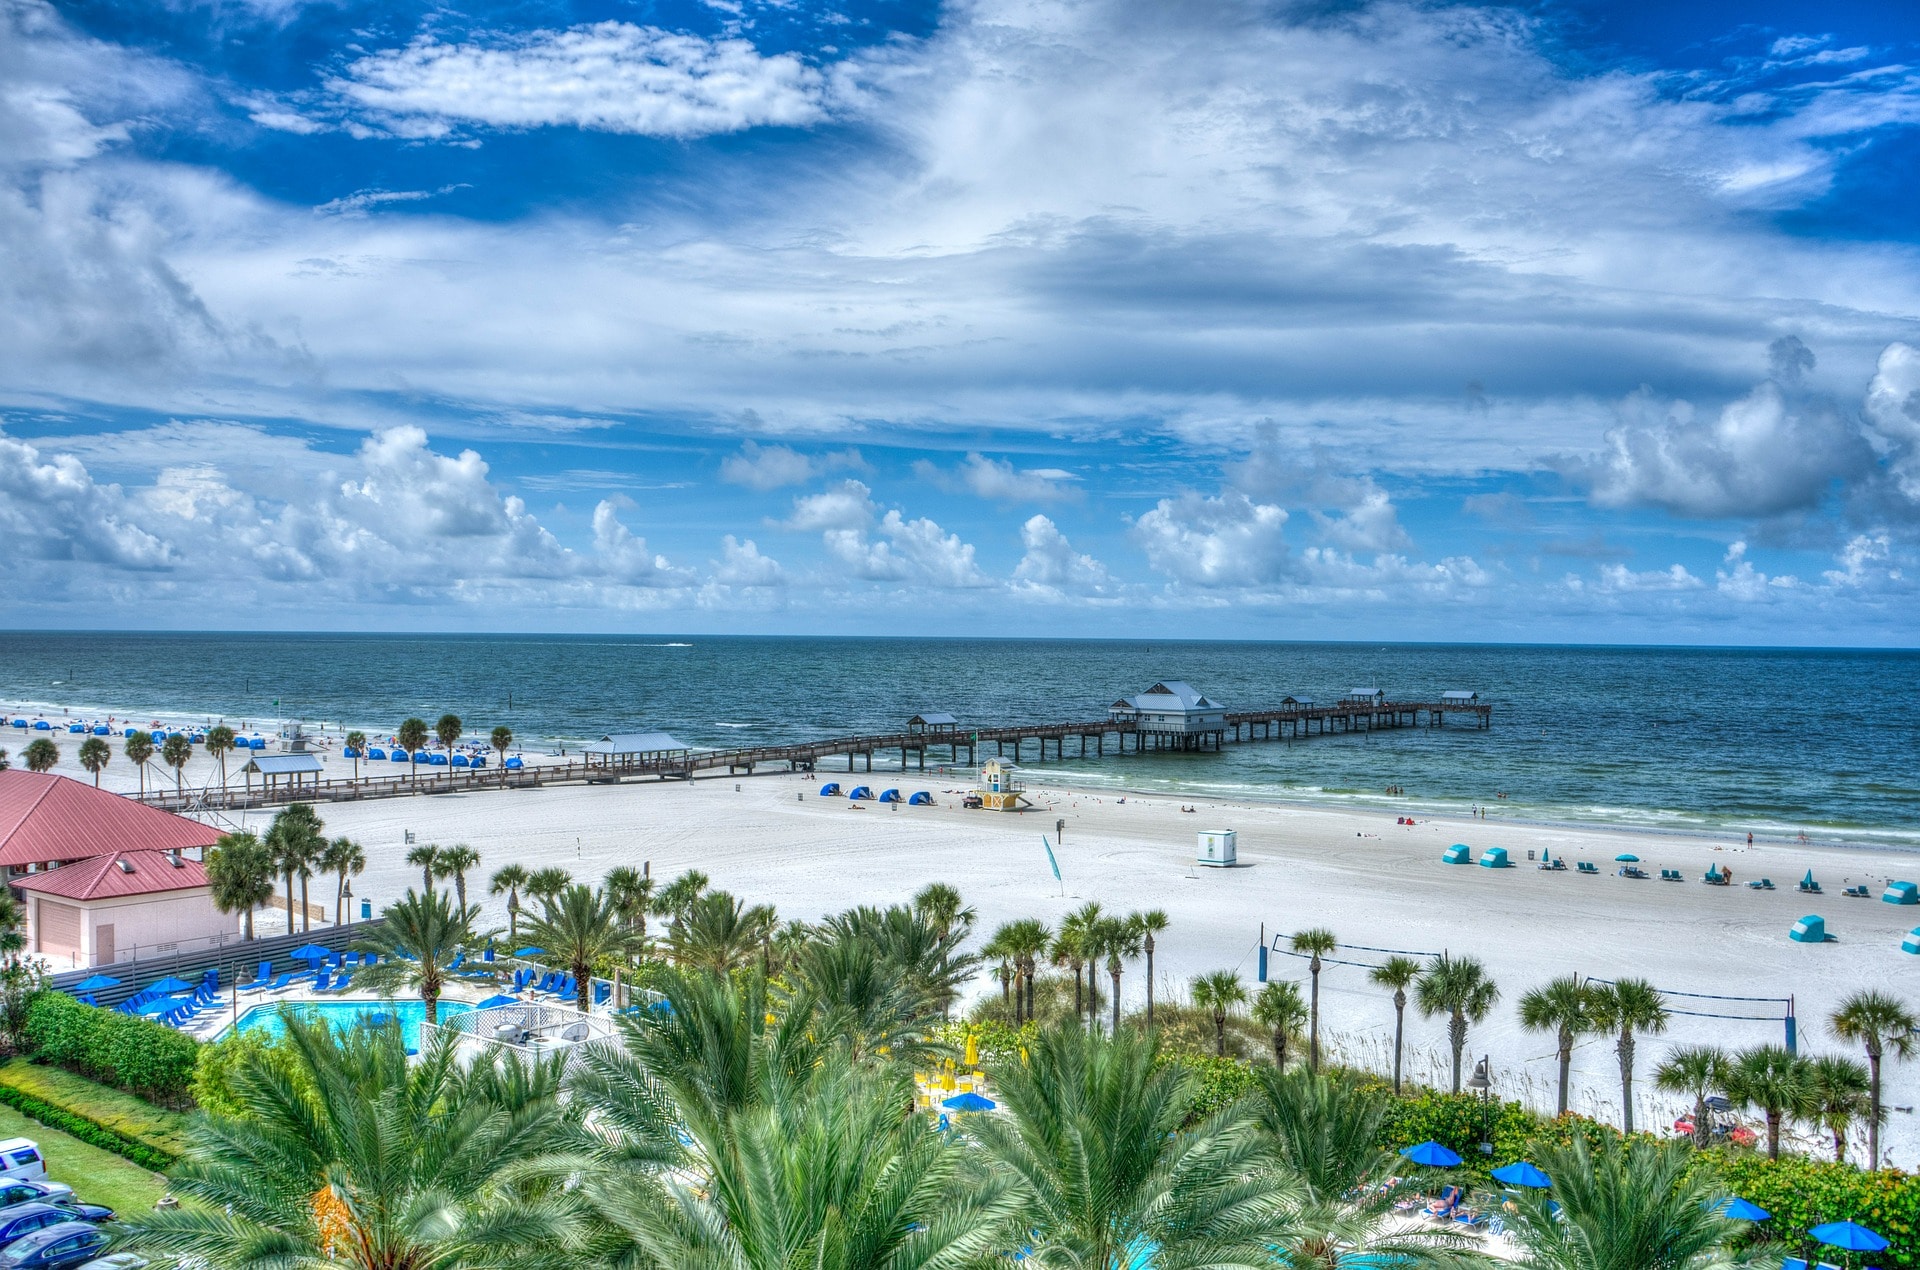 Plan a Summer Getaway to Clearwater